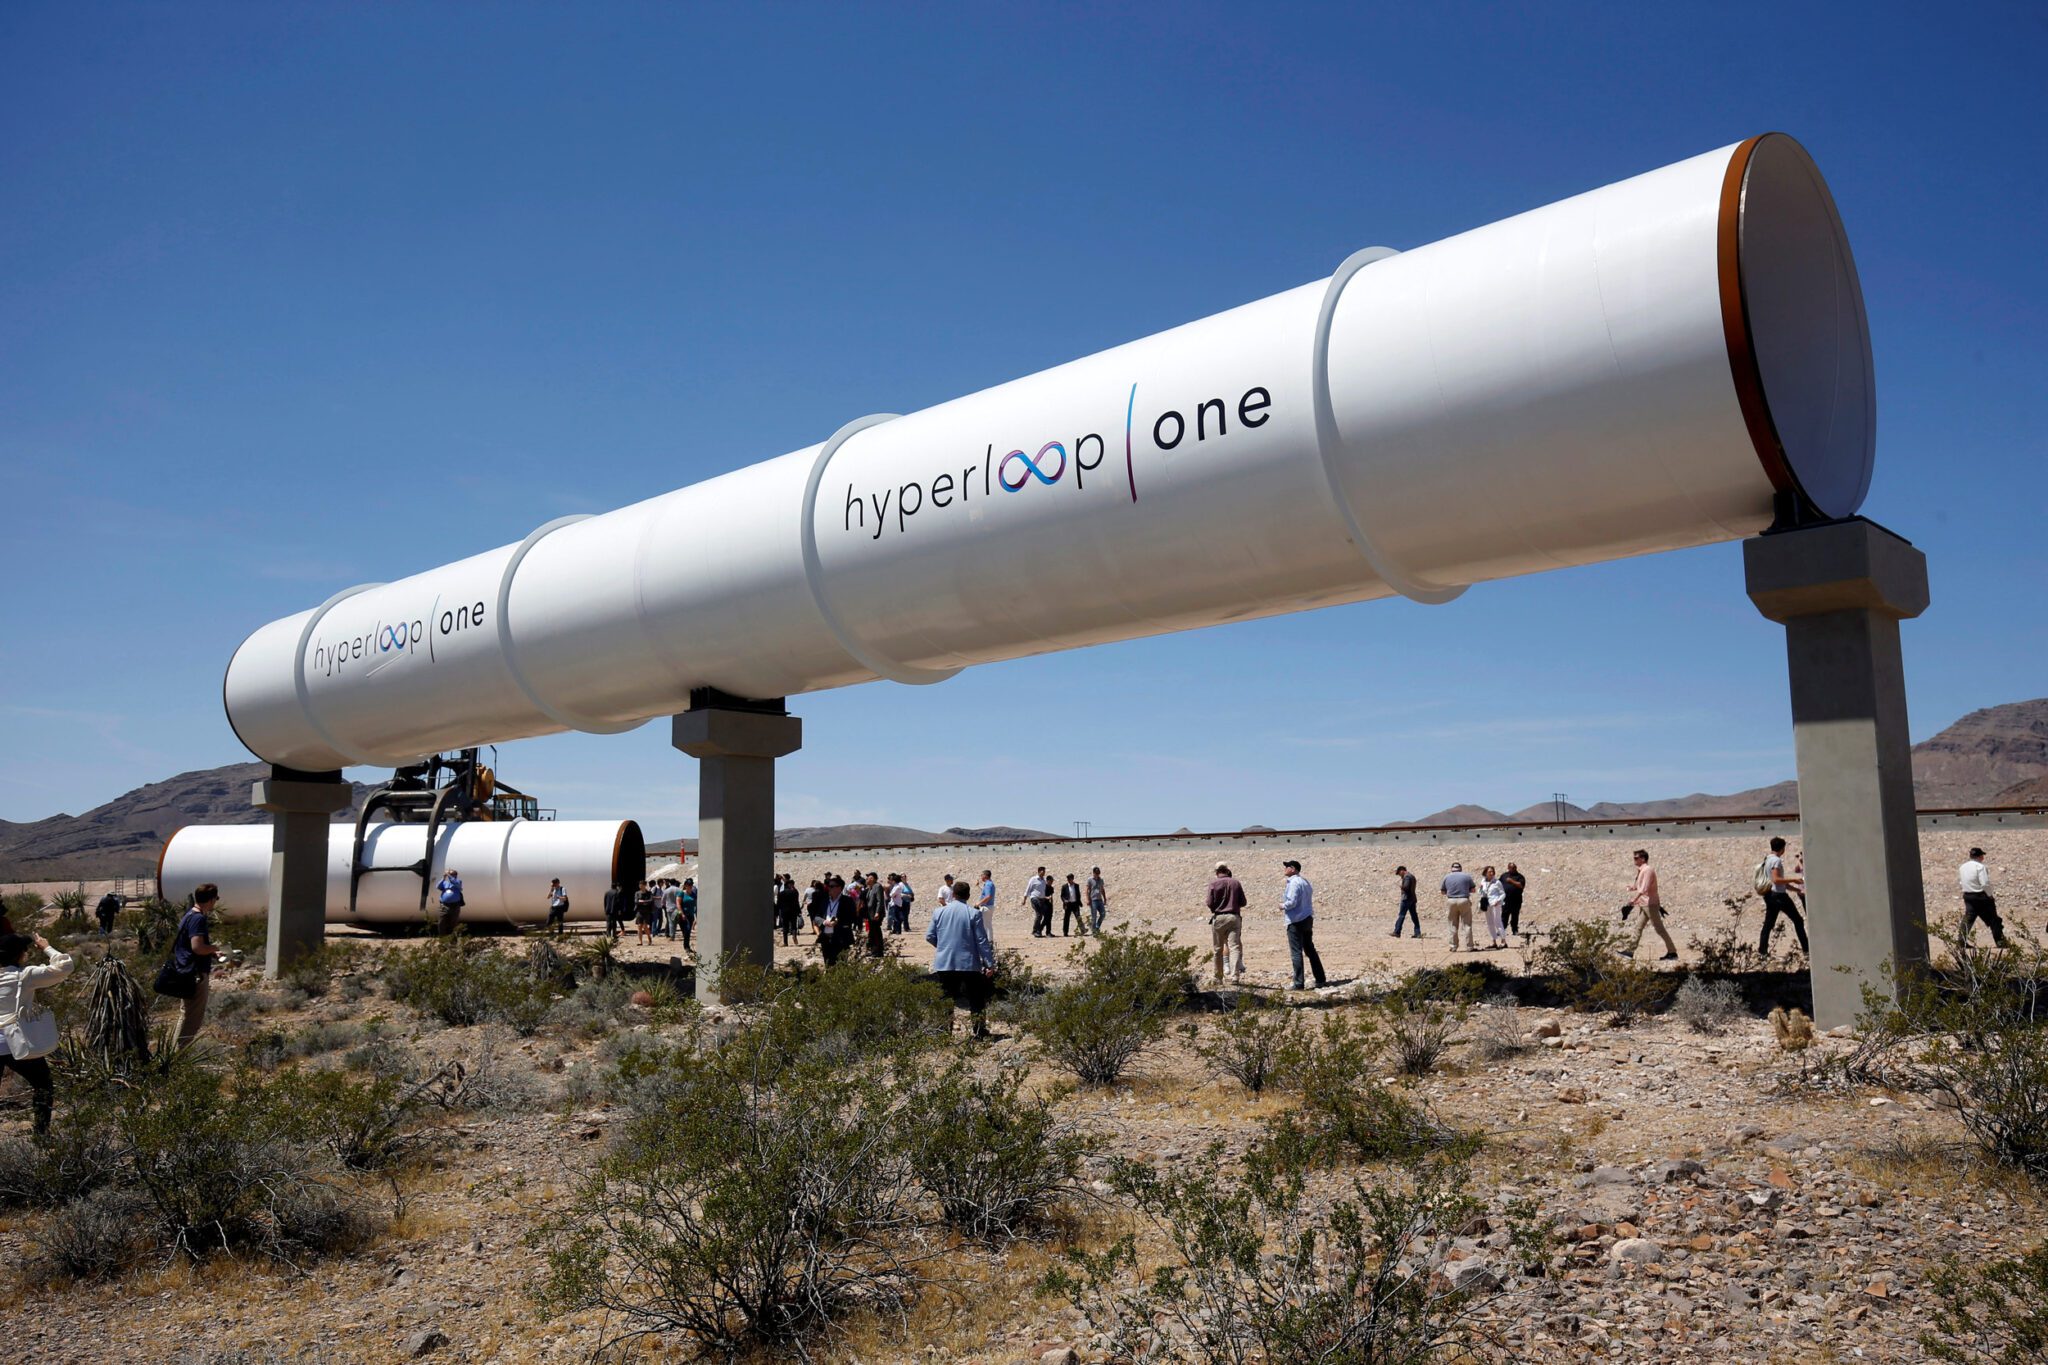 Journalists and guests look over tubes following a propulsion open air test at Hyper loop One in North Las Vegas. Source: Reuters